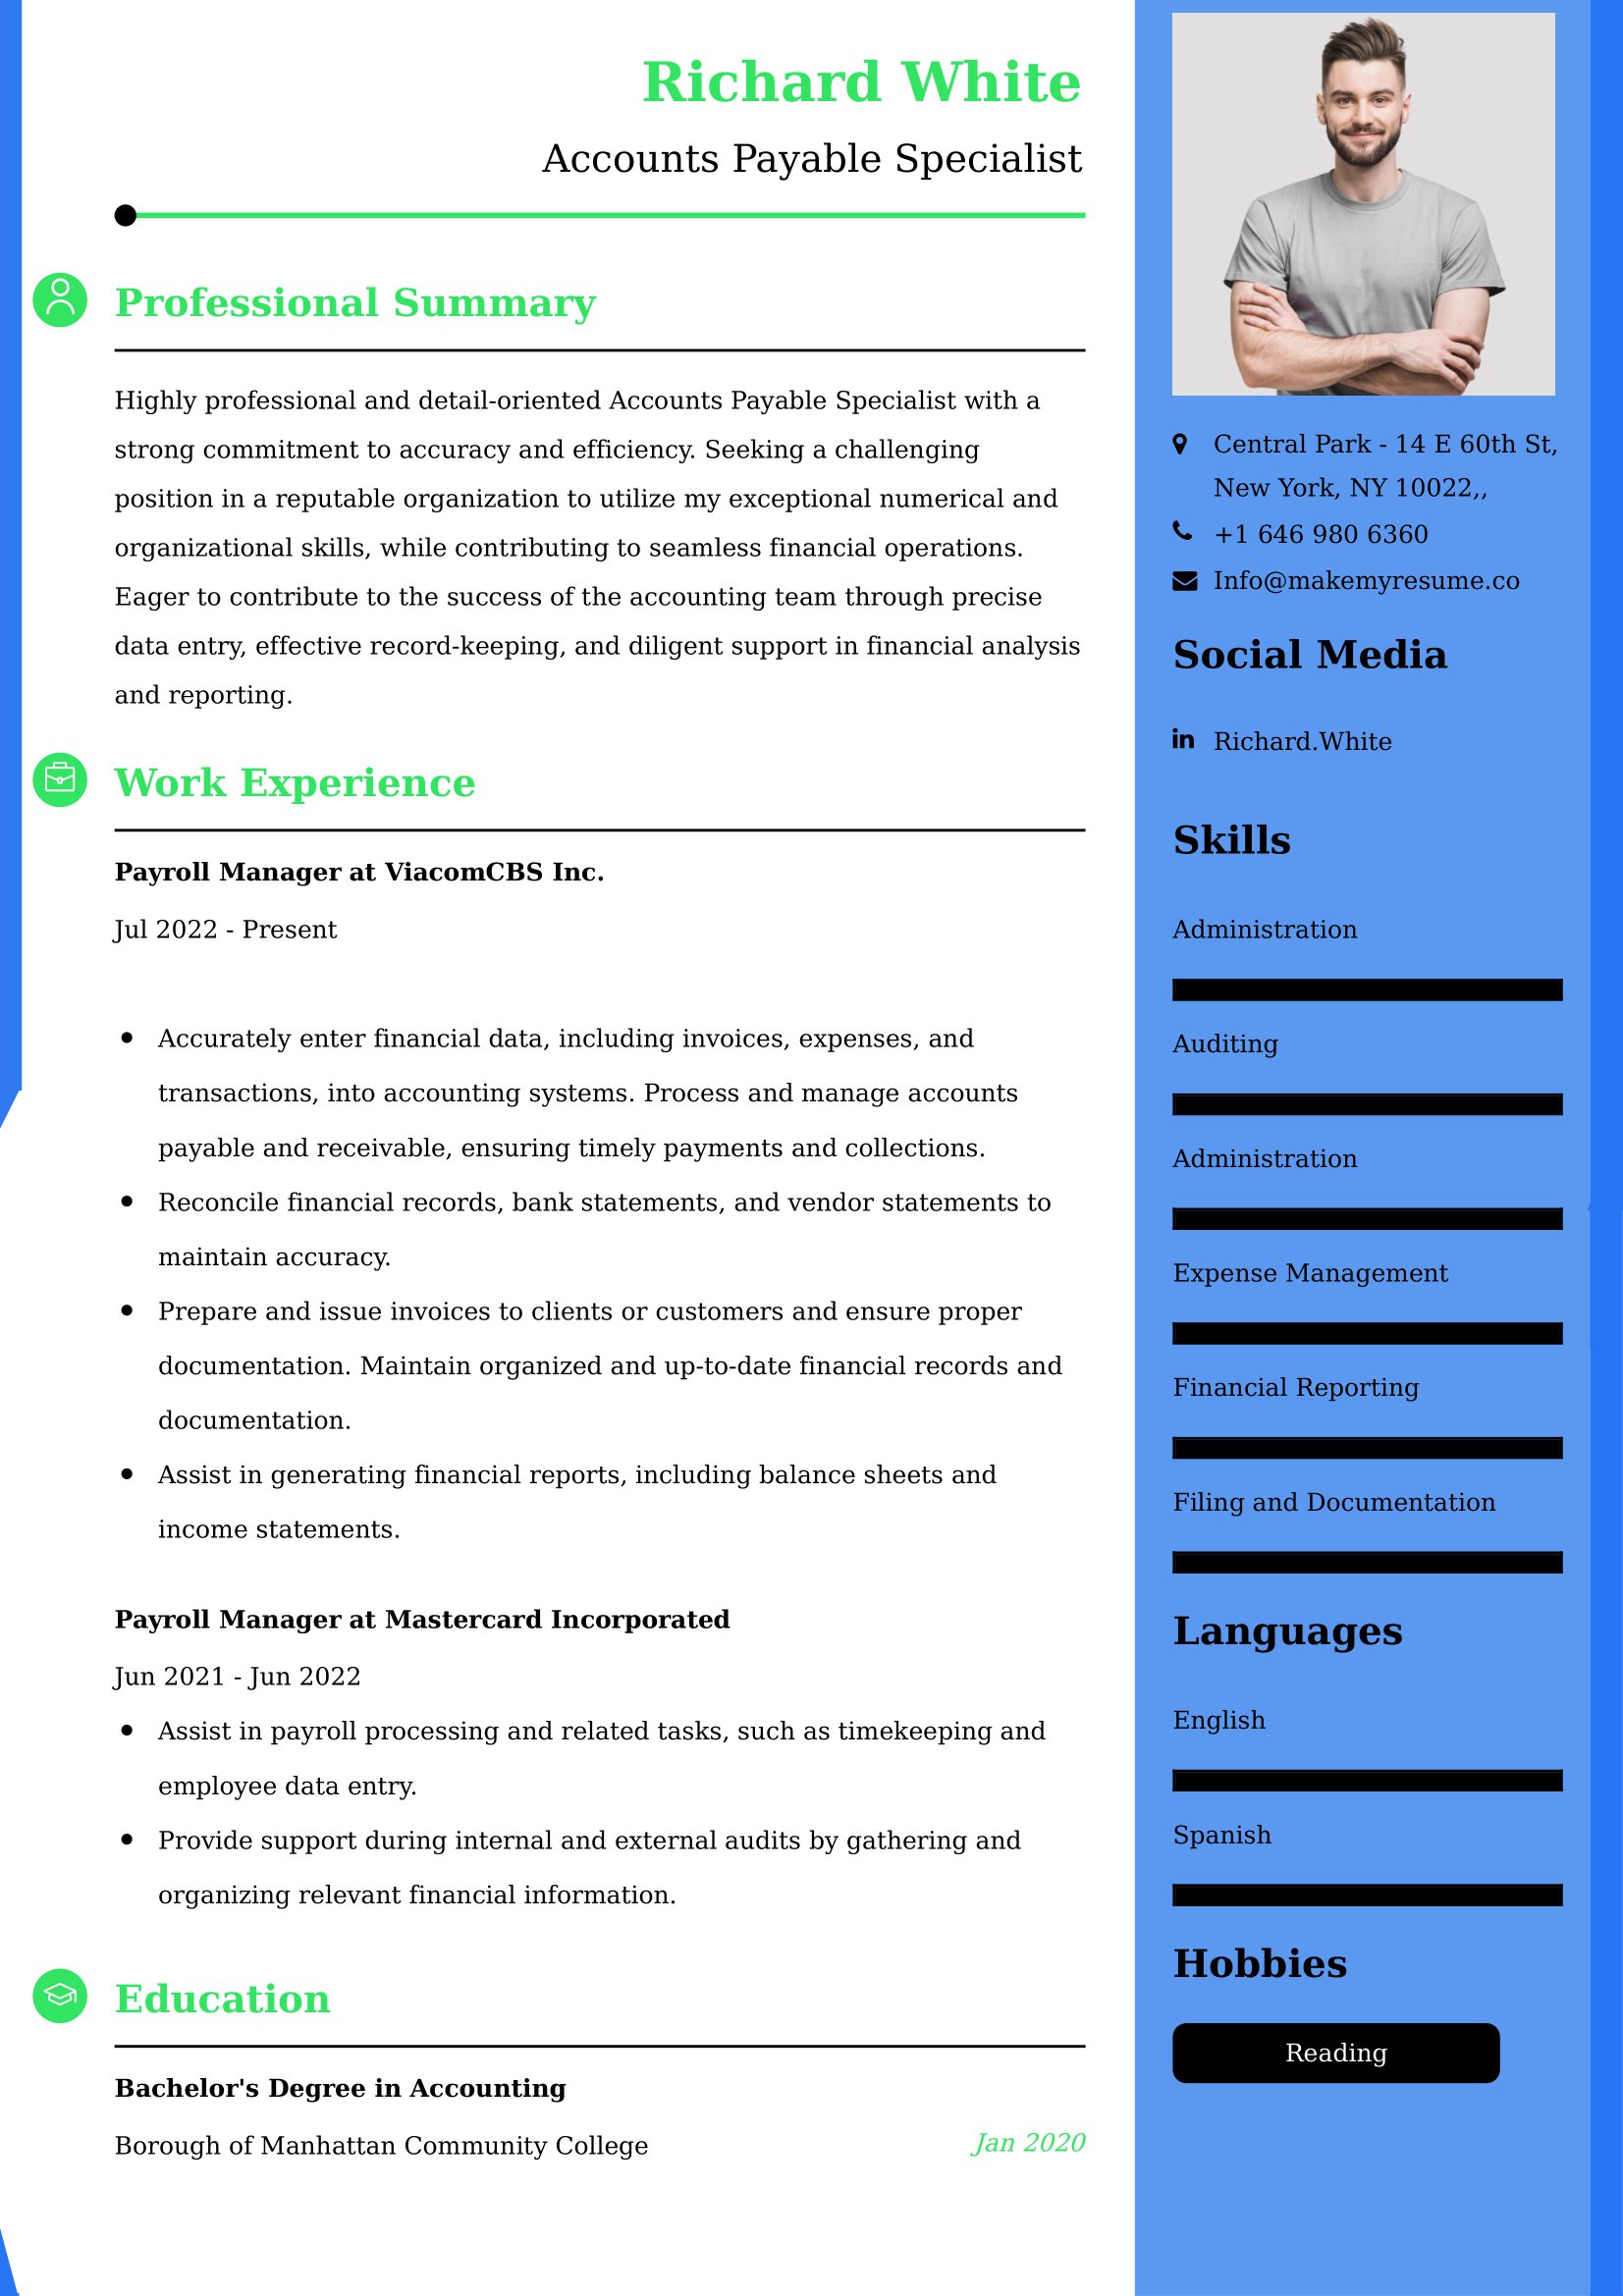 Accounts Payable Specialist Resume Examples - Australian Format and Tips